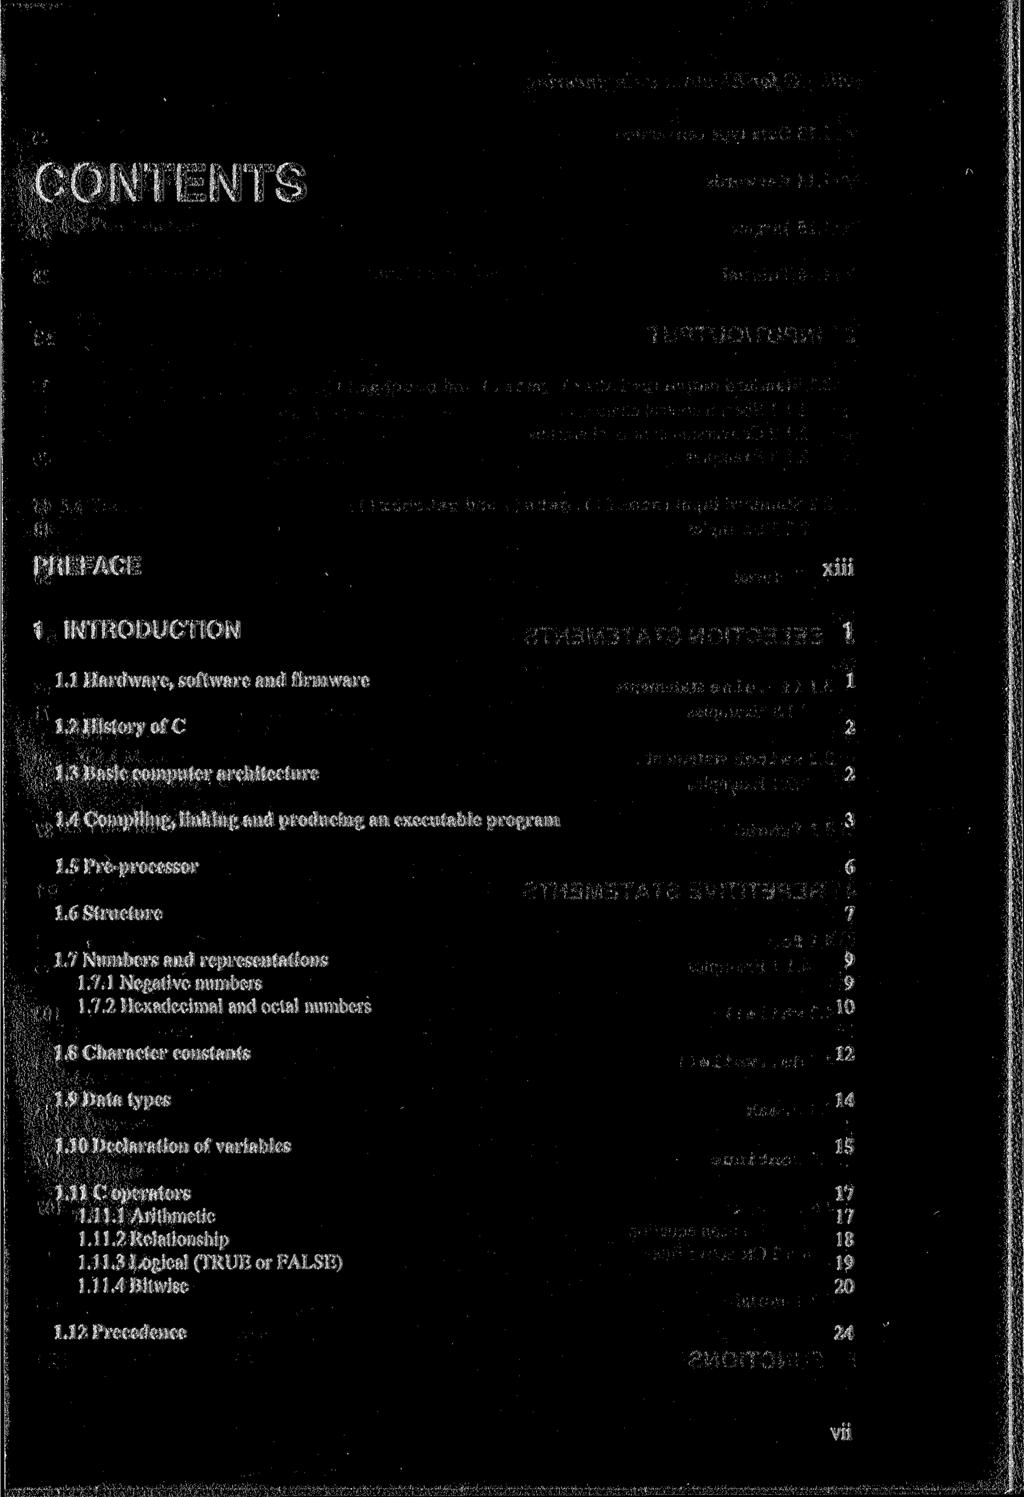 CONTENTS PREFACE 1 INTRODUCTION 1.1 Hardware, software and firmware 1.2 History of C 1.3 Basic computer architecture 1.4 Compiling, linking and producing an executable program 1.5 Pre-processor 1.